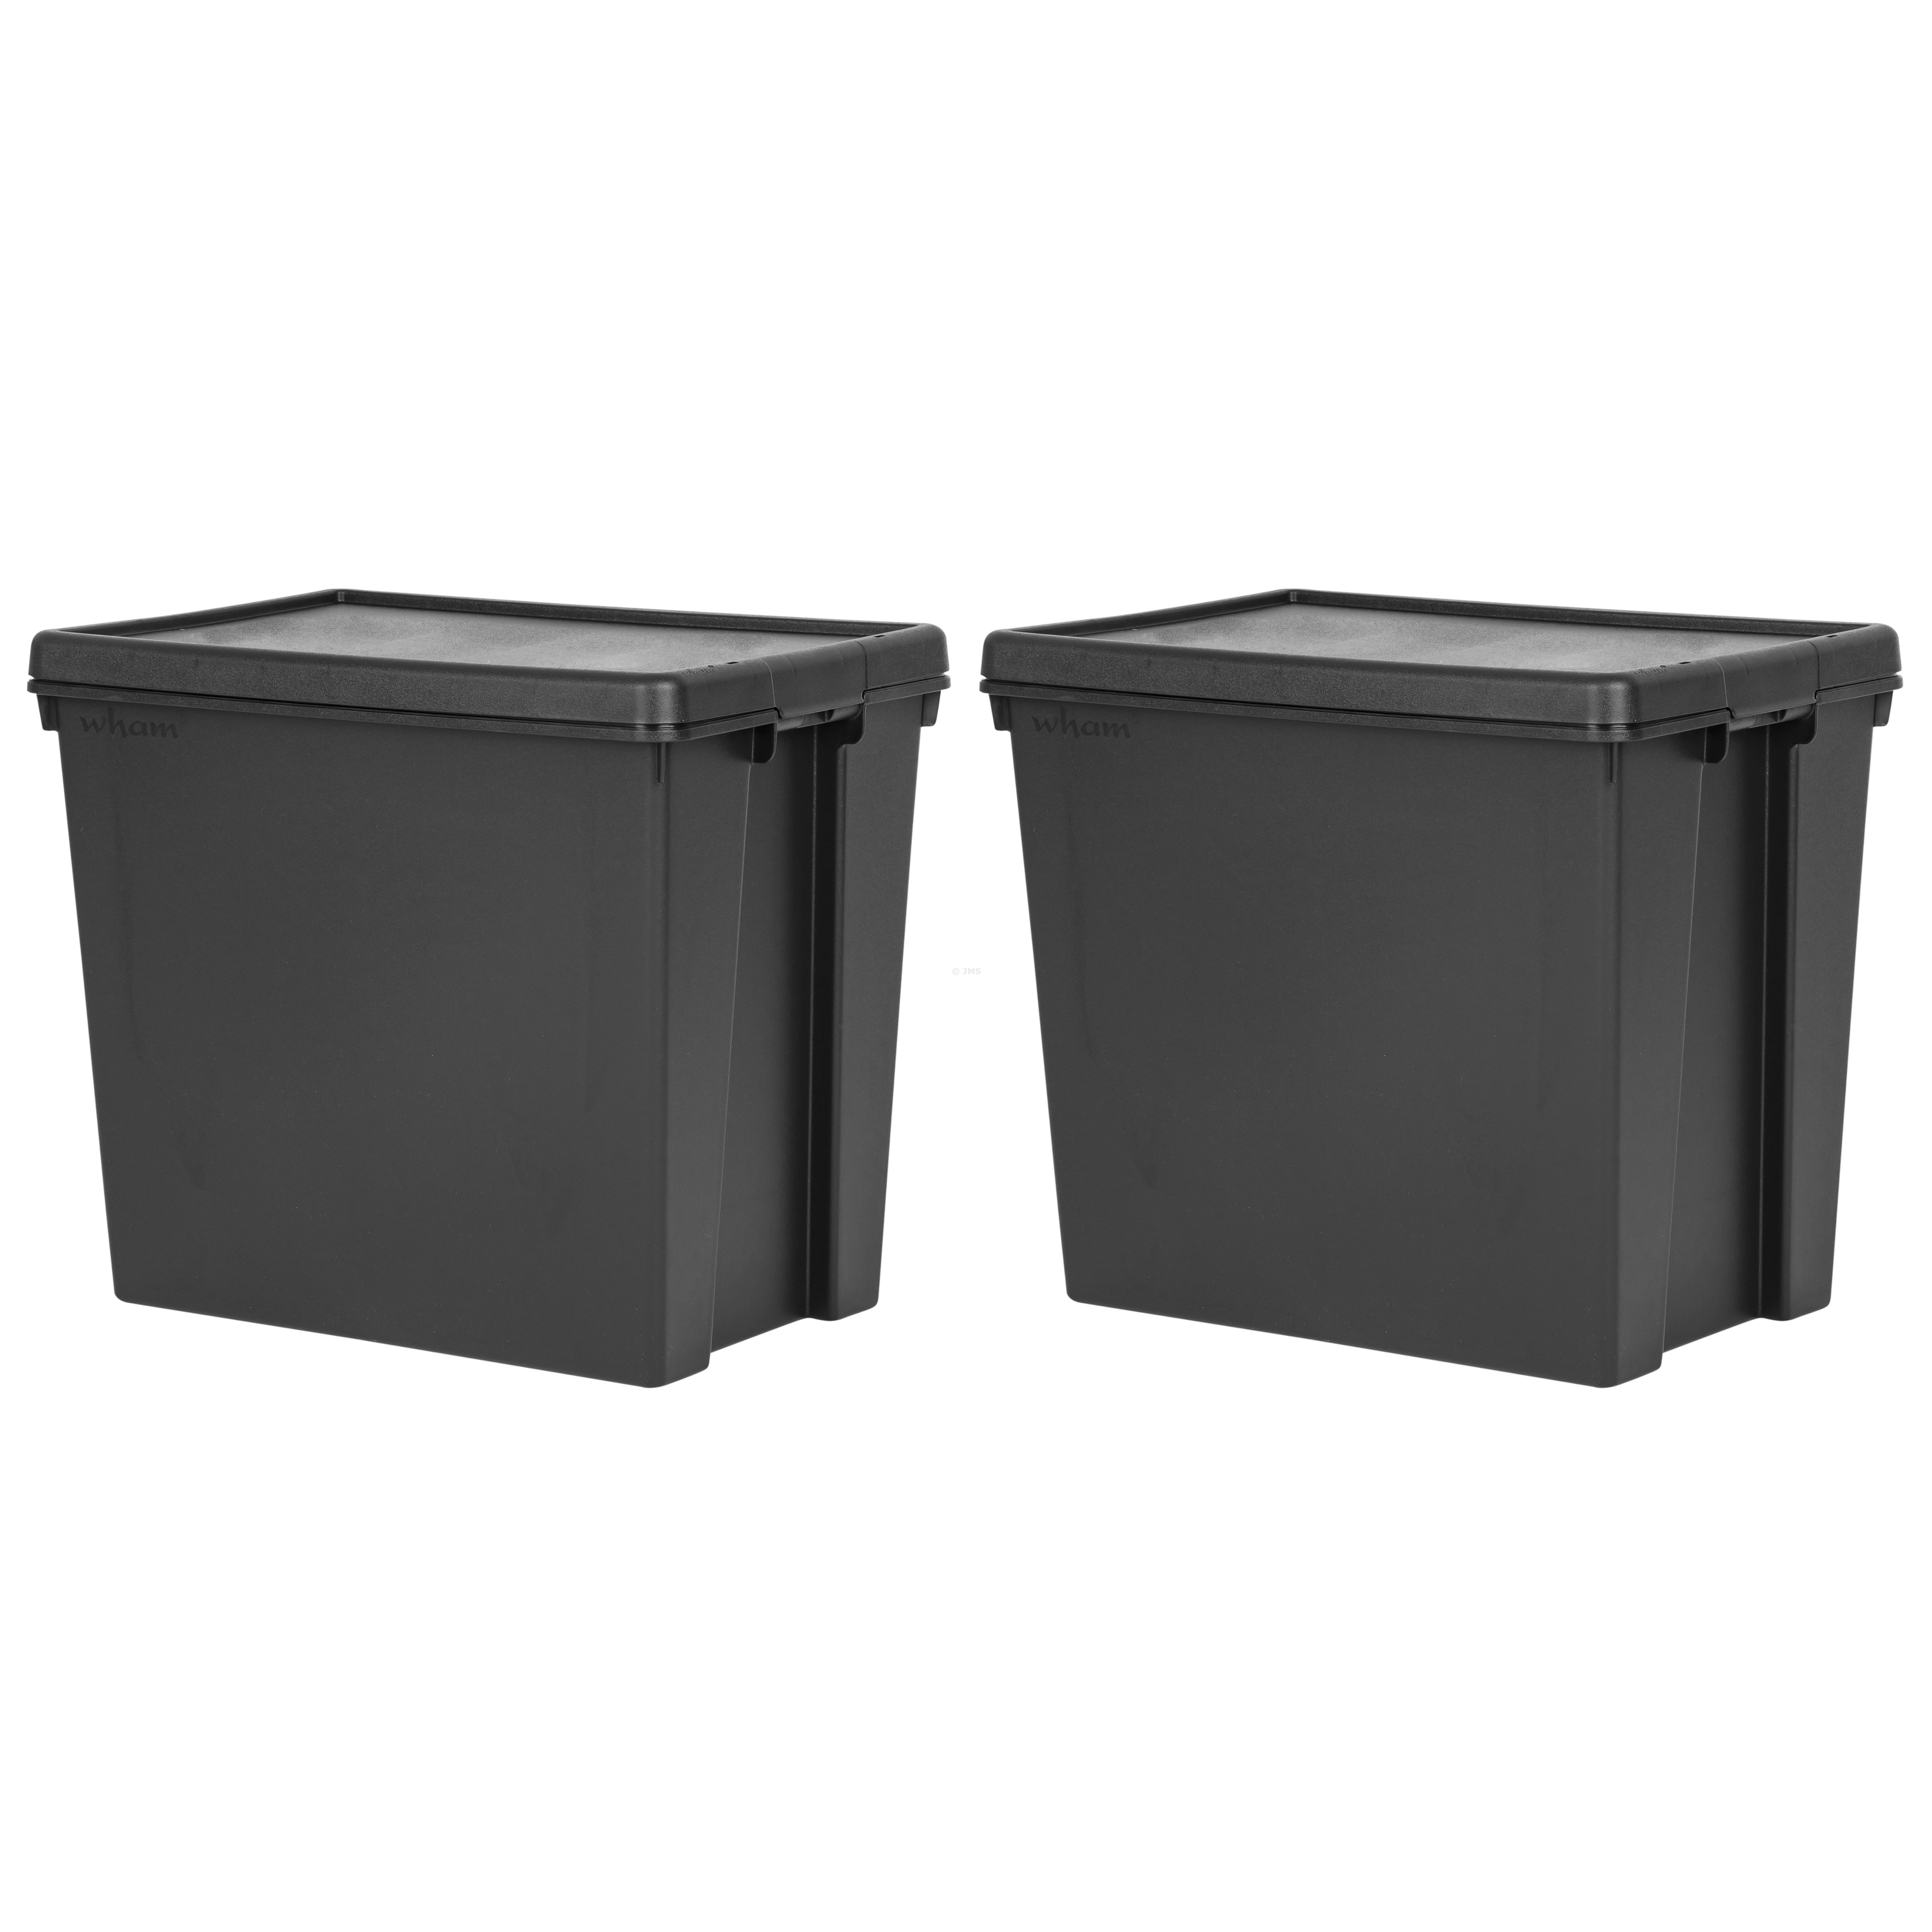 [Set of 2] Heavy Duty 92L Black Storage Box with Lid Recycled Plastic Stackable Nestable Home Office Garage Toolbox